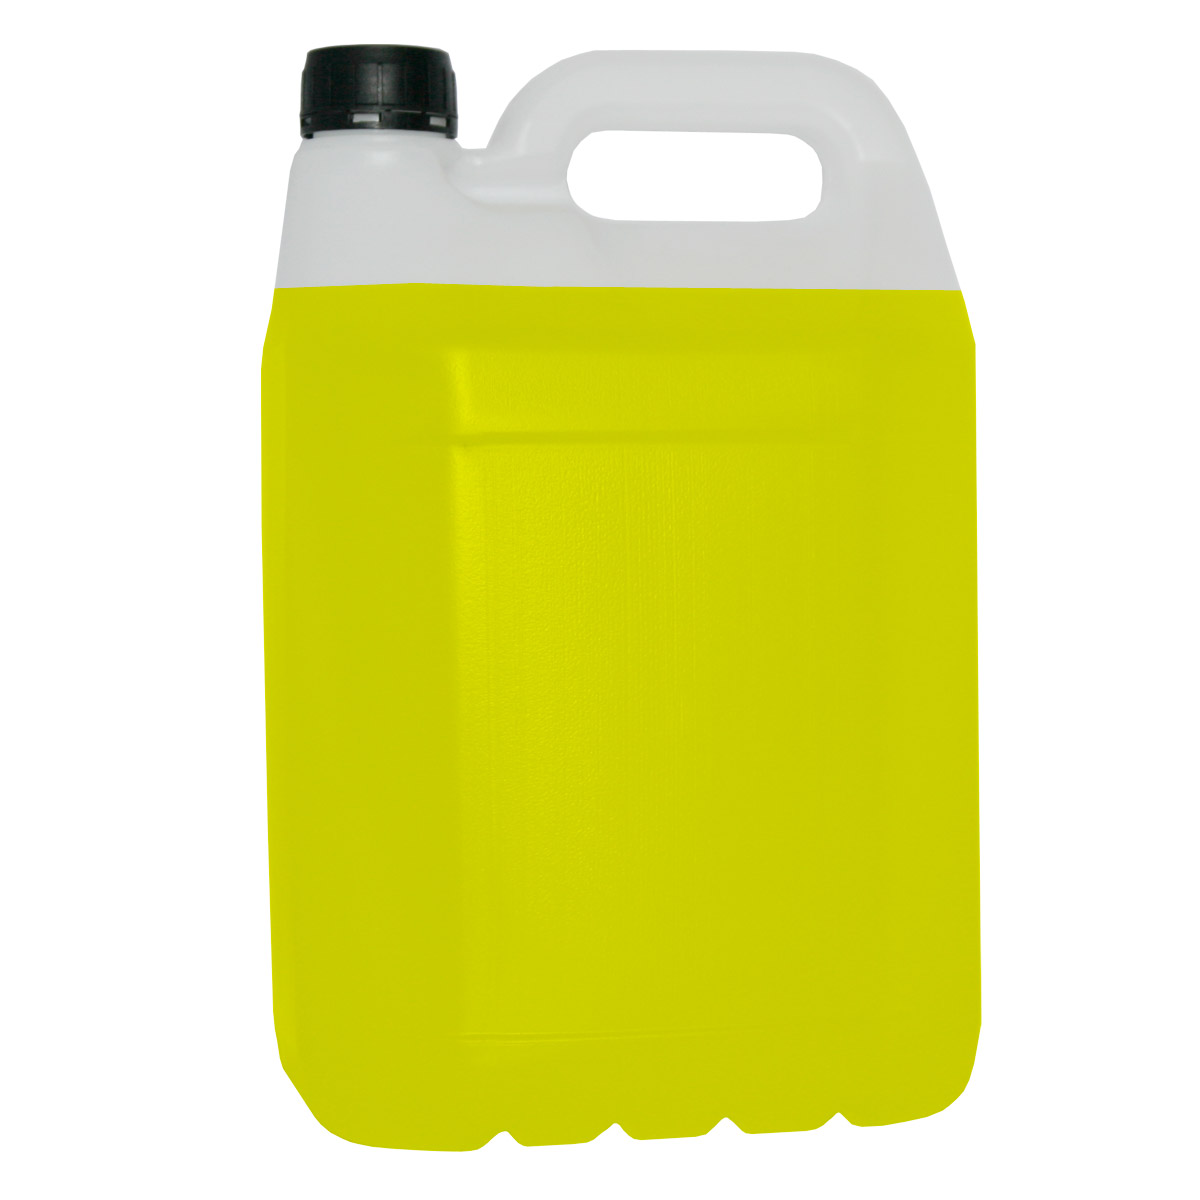 Cleaning fluid for print heads - yellow. inside